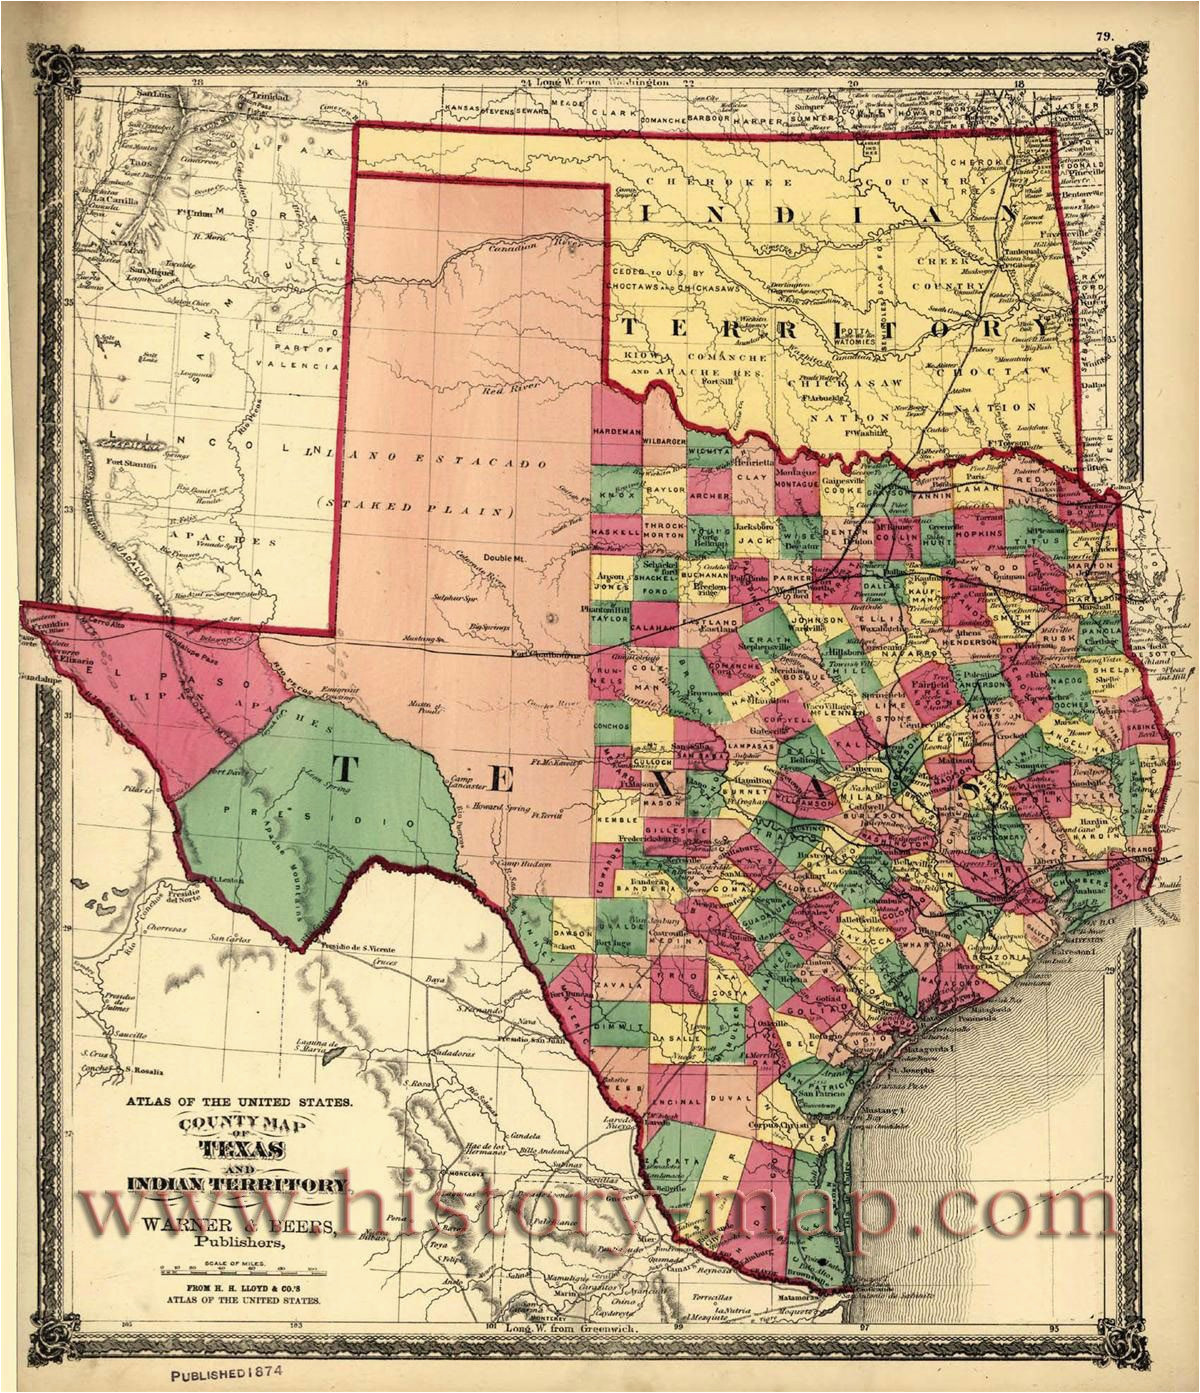 Map Of Midlothian Texas Texas Indian Territory Map Business Ideas 2013